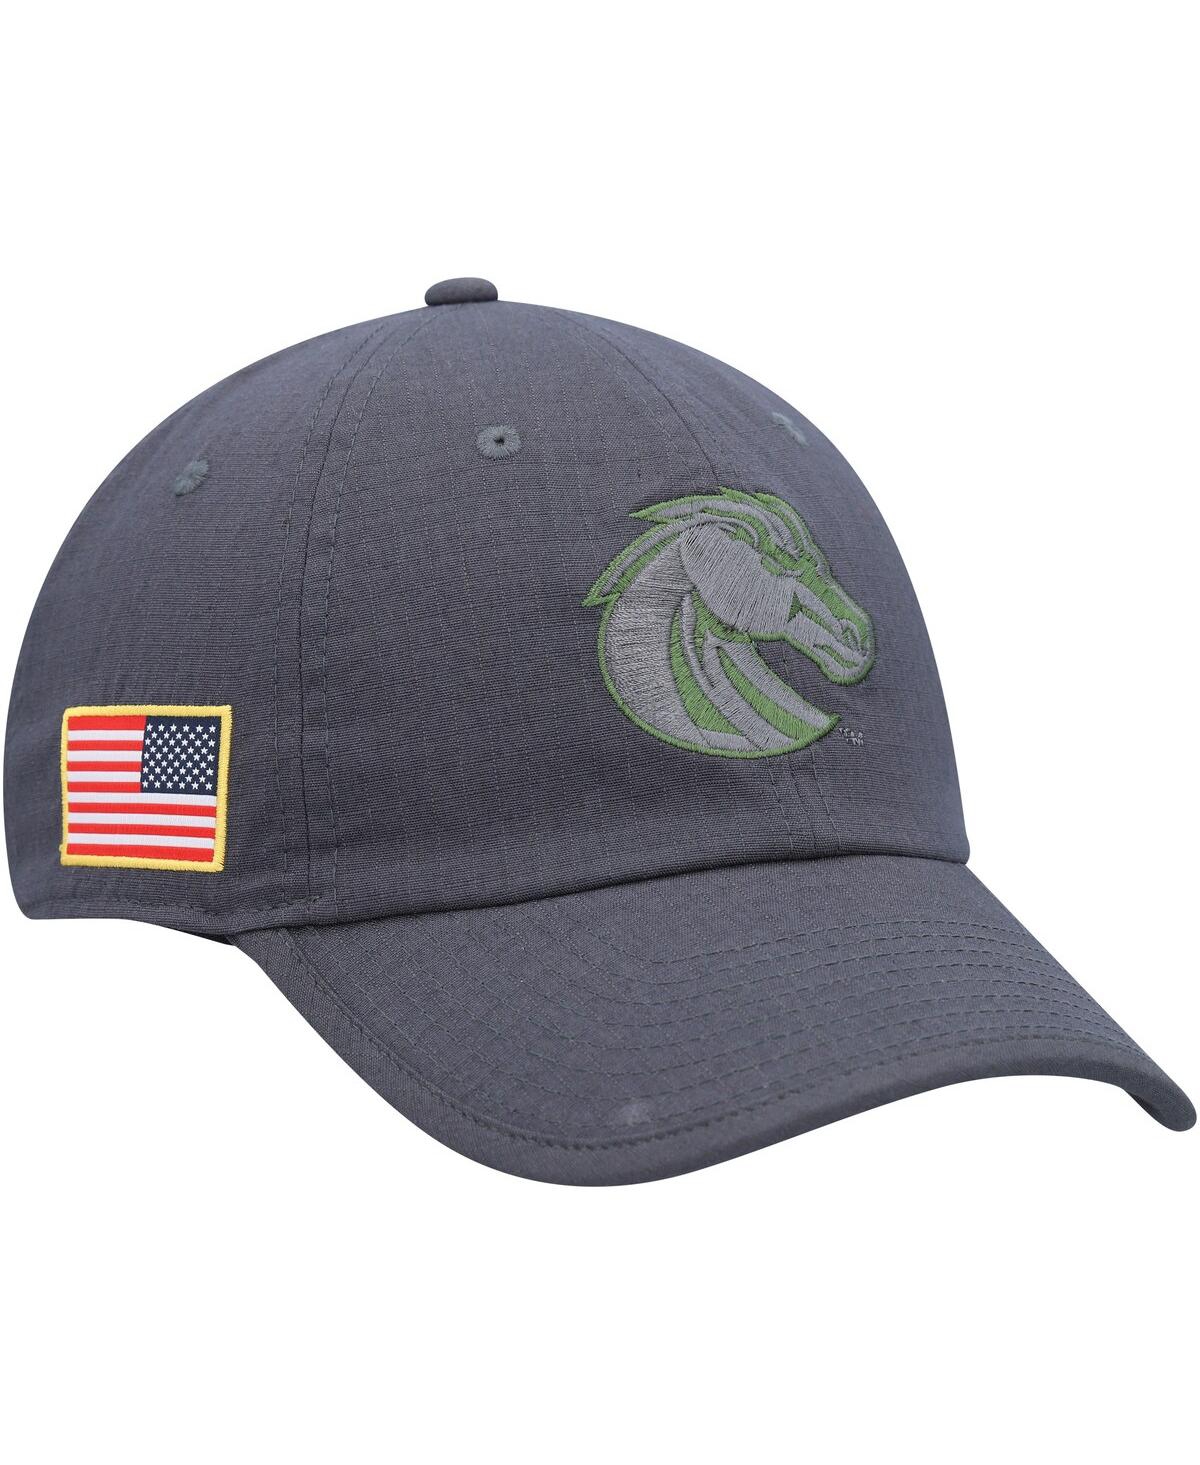 Nike Men's  Charcoal Boise State Broncos Veterans Day Tactical Heritage86 Performance Adjustable Hat